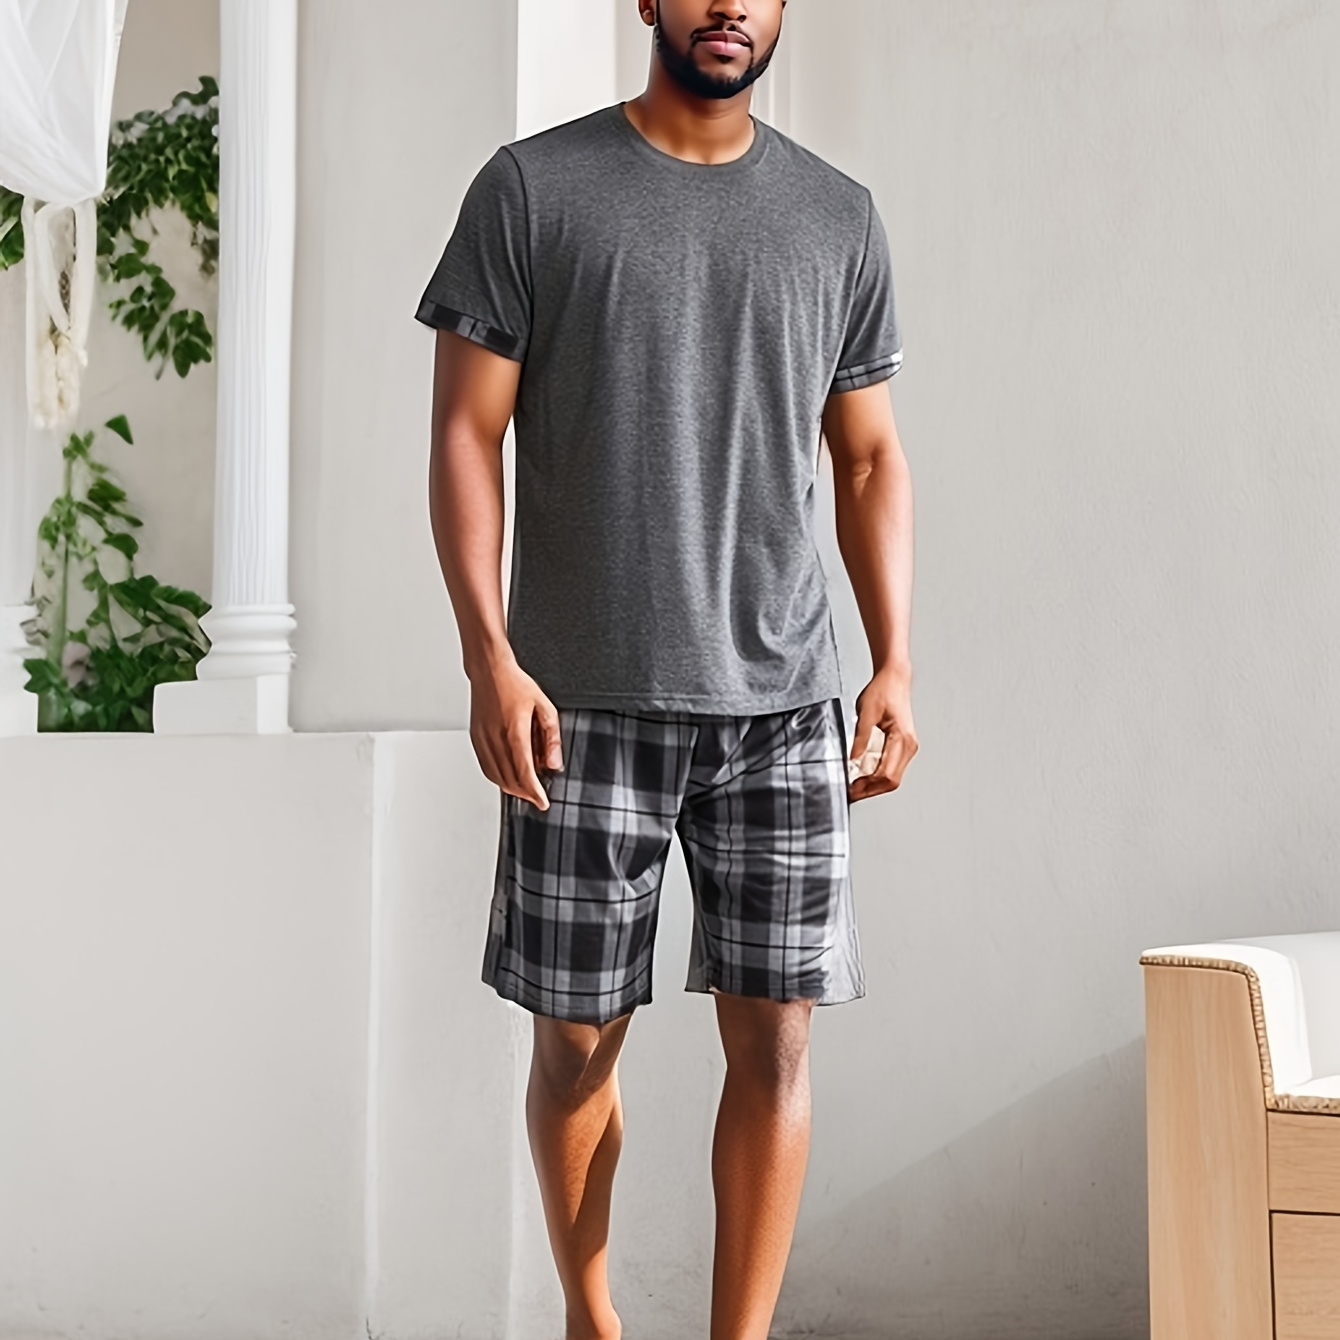 

2 Pcs Men's Simple Short T-shirts With Checkered Cuffs & Plaid Shorts Pajama Sets, Comfortable & Skin-friendly Style Pajamas For Men's Cozy Loungewear